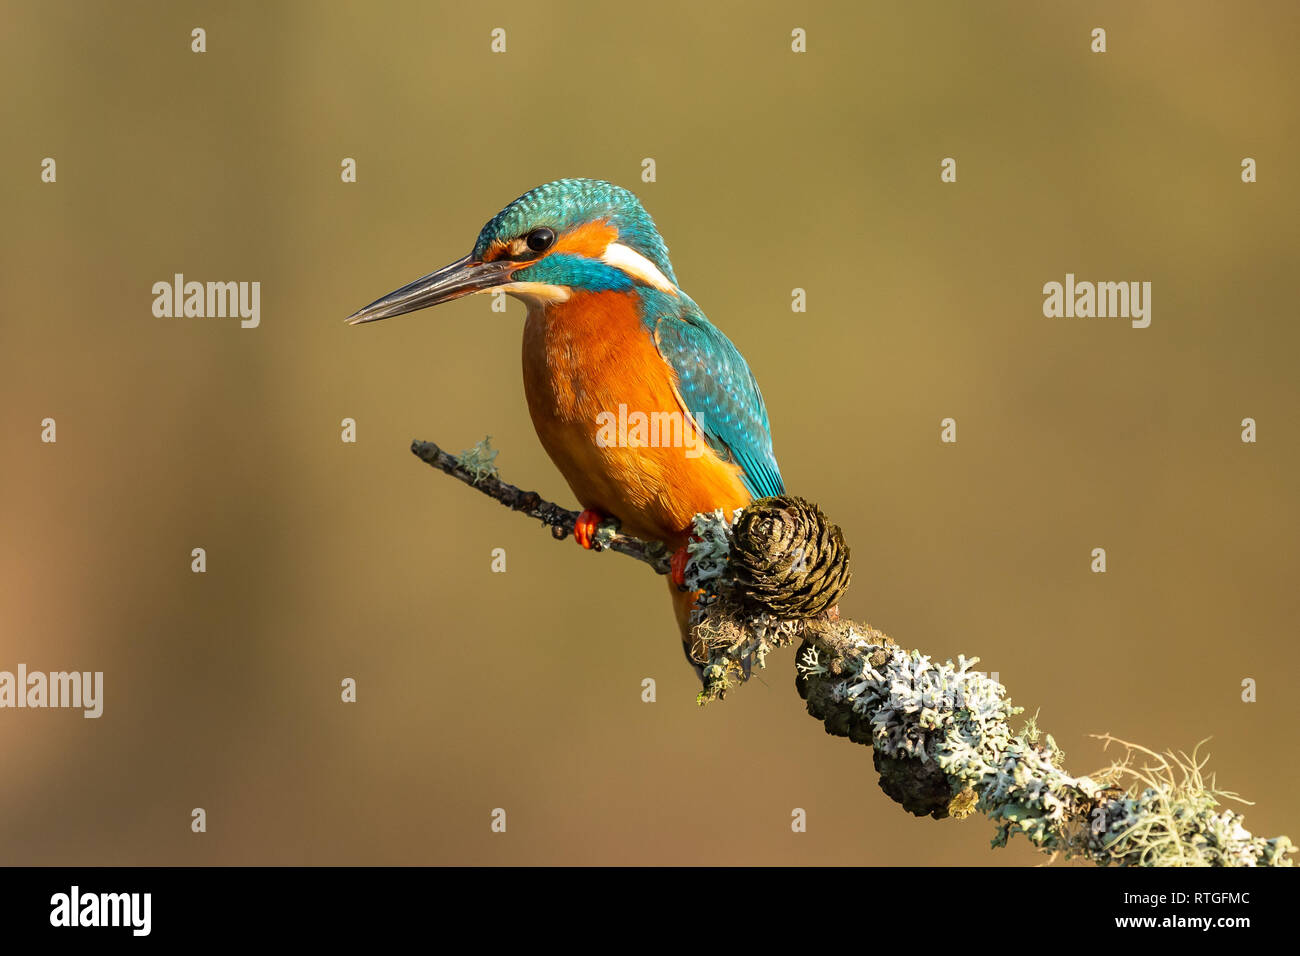 A male kingfisher (Alcedo atthis) perched on a branch in the sun Stock Photo